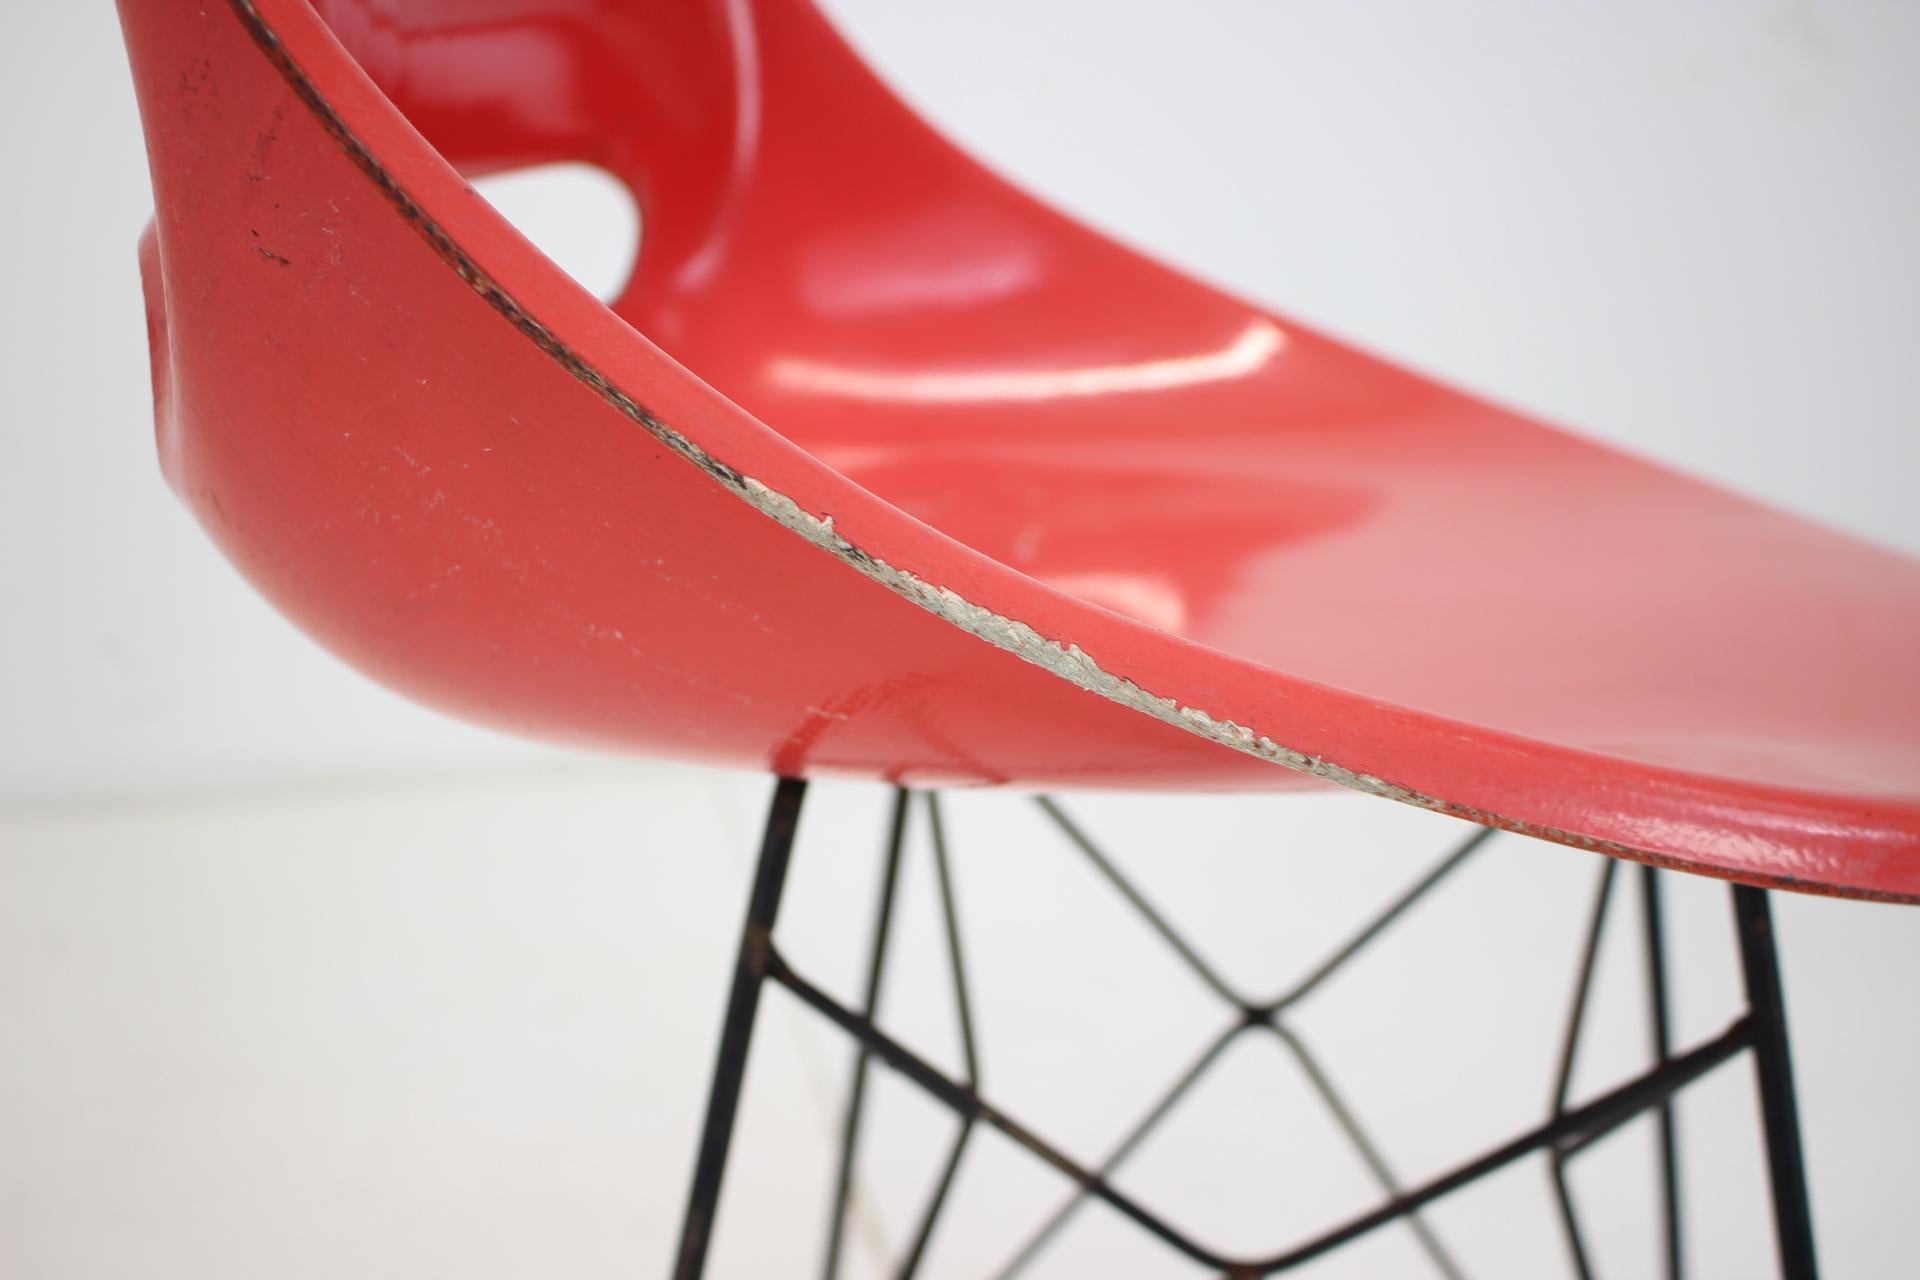 Midcentury Red Design Fiberglass Dining Chairs by M.Navratil, 1960s For Sale 4